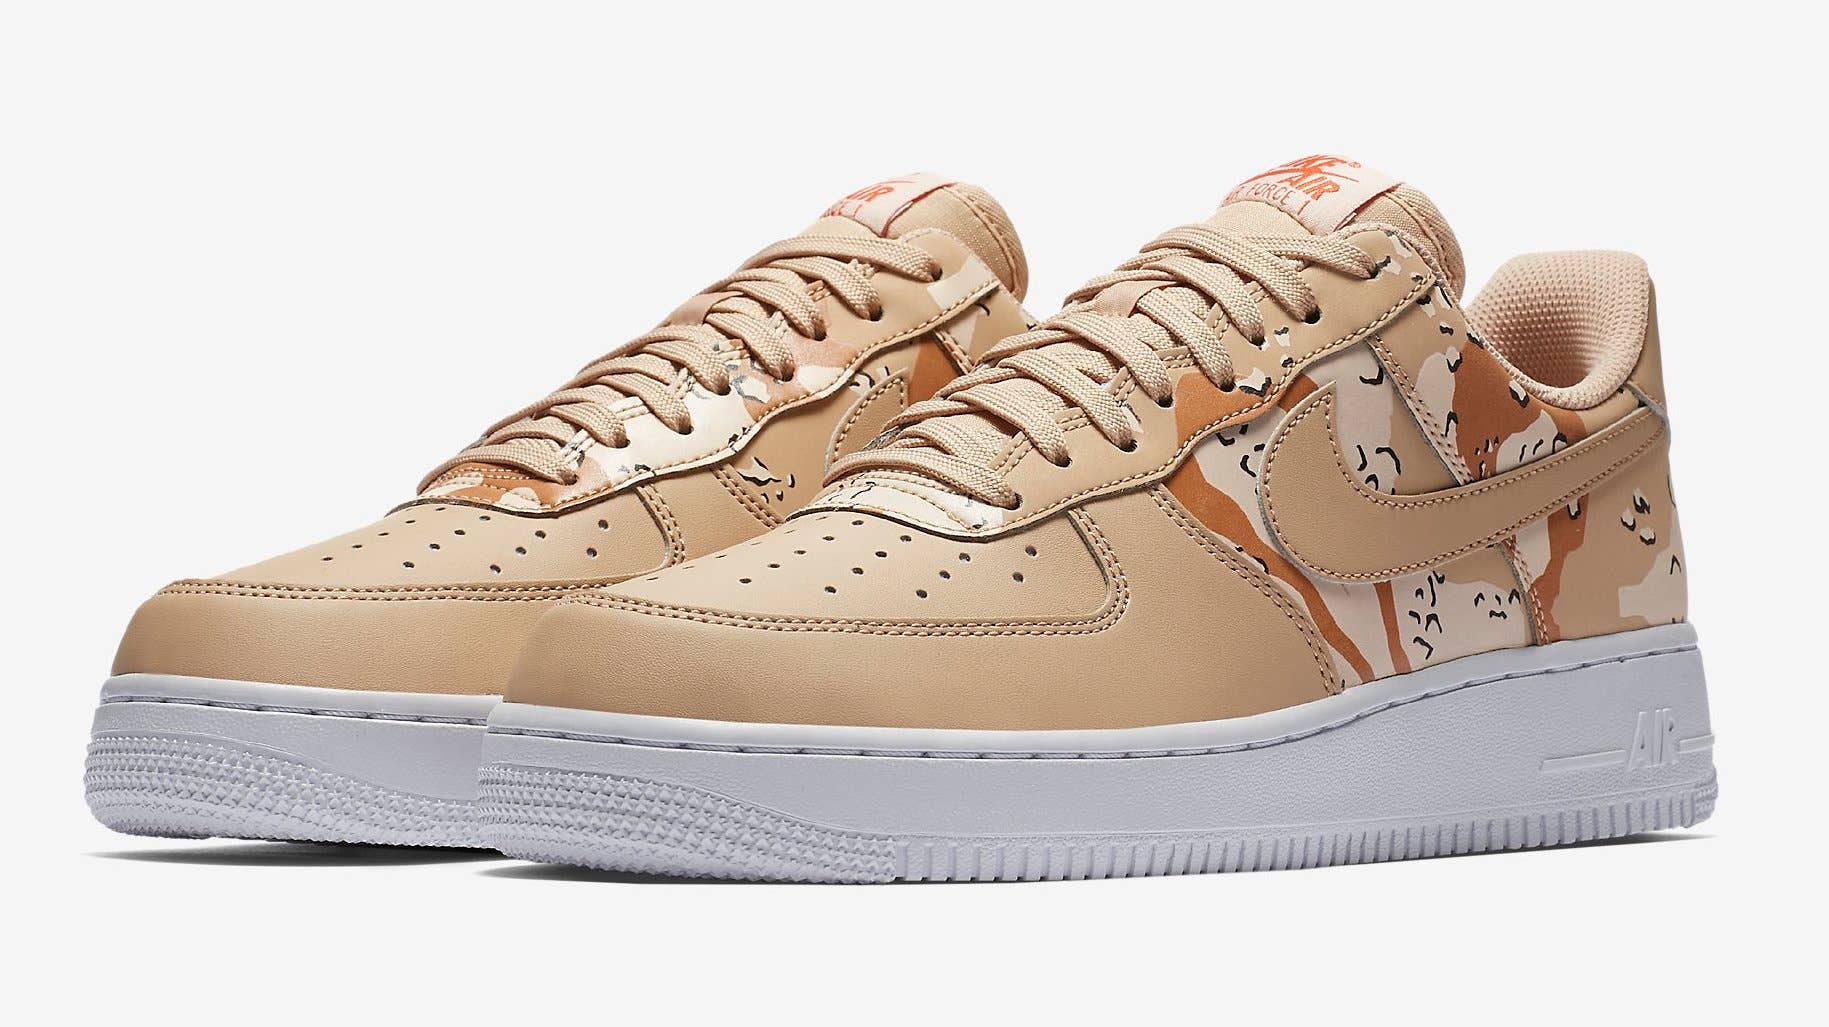 Nike Air Force 1 Low 'Country Camo' 823511 202 (Pair)